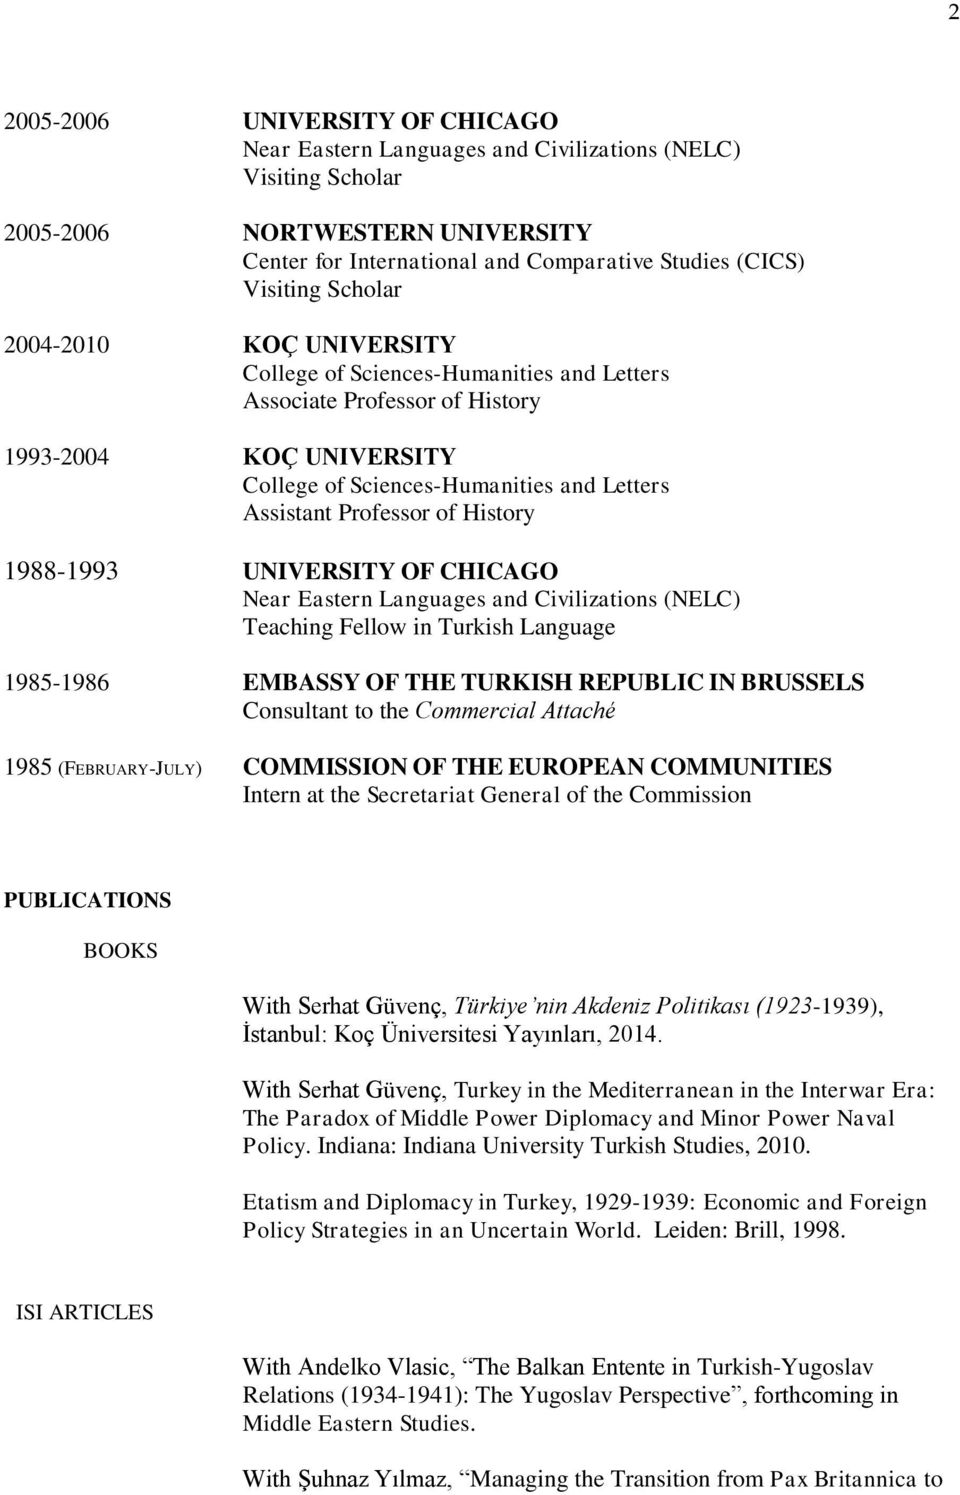 History 1988-1993 UNIVERSITY OF CHICAGO Near Eastern Languages and Civilizations (NELC) Teaching Fellow in Turkish Language 1985-1986 EMBASSY OF THE TURKISH REPUBLIC IN BRUSSELS Consultant to the